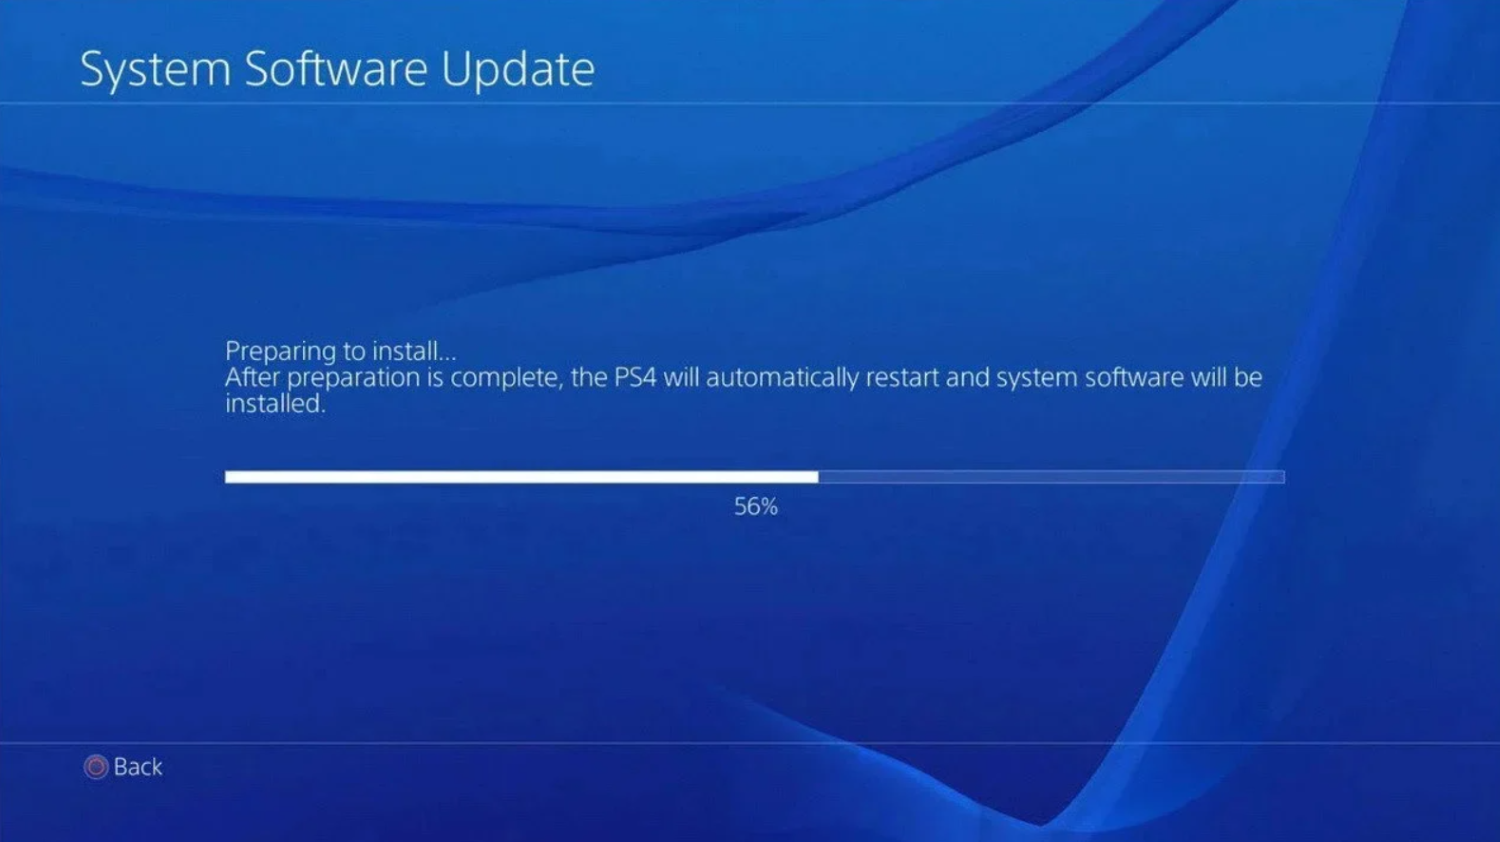 update the system software